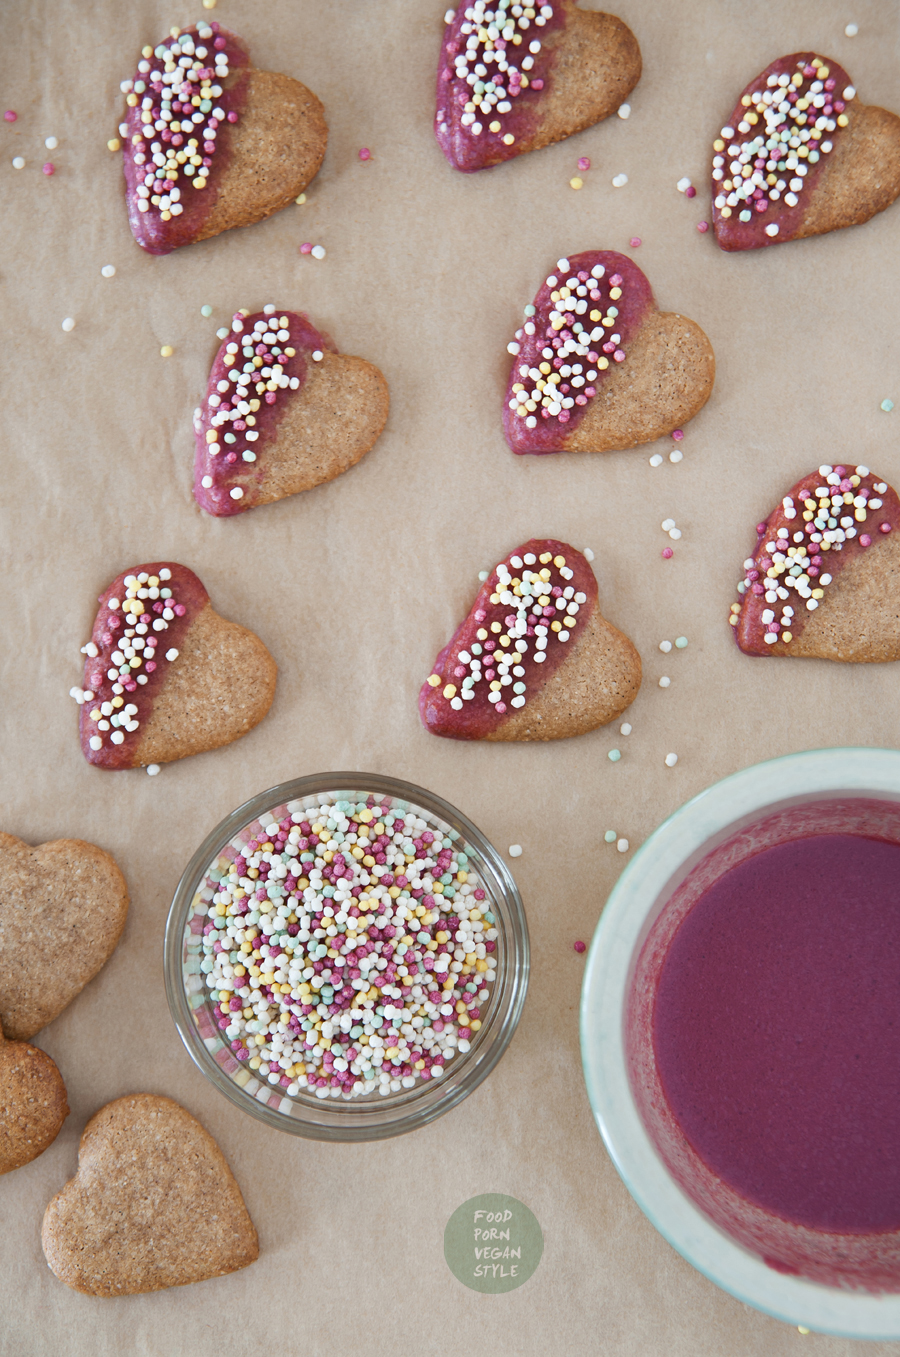 Vegan almond-chestnut cookies 'hearts' with pink icing and colorful sprinkles